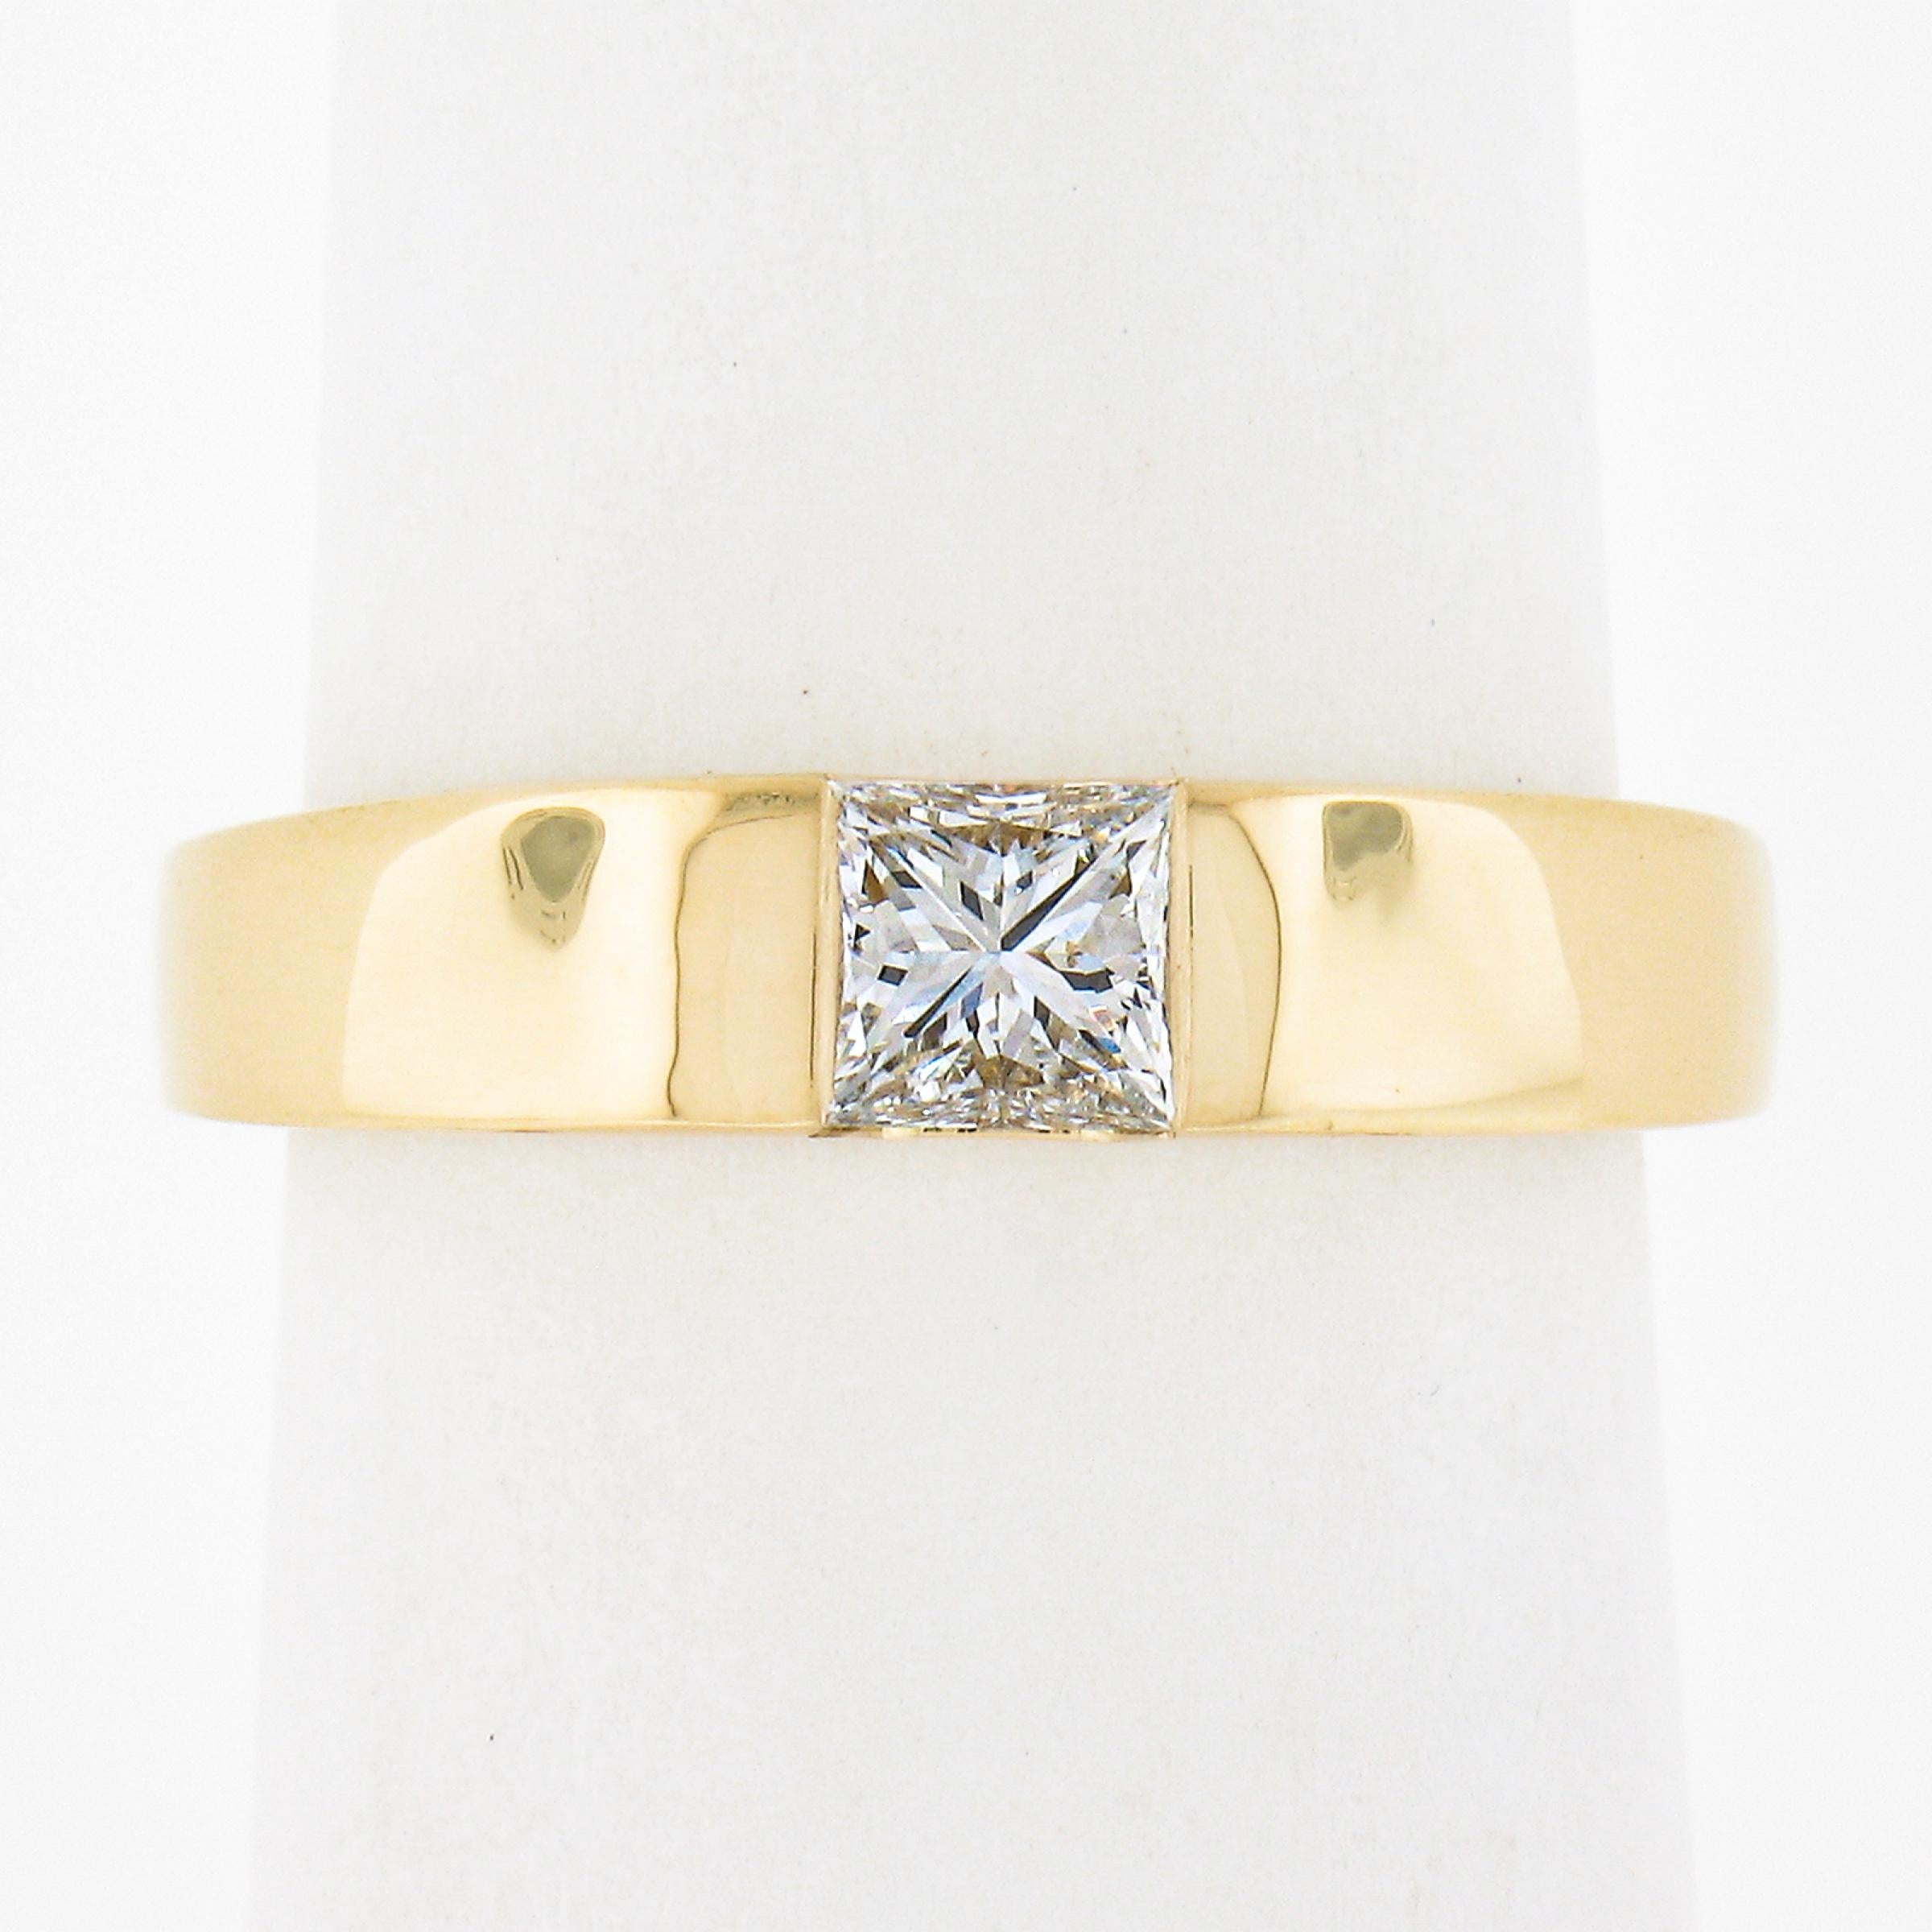 --Stone(s):--
(1) Natural Genuine Diamond - Square Princess Cut - Channel Flush Set - H Color - VS2 Clarity
Total Carat Weight:	0.49 (exact)

Material: Solid 18K Yellow Gold
Weight: 4.42 Grams
Ring Size: 6.5 (Fitted on a finger. We can custom size